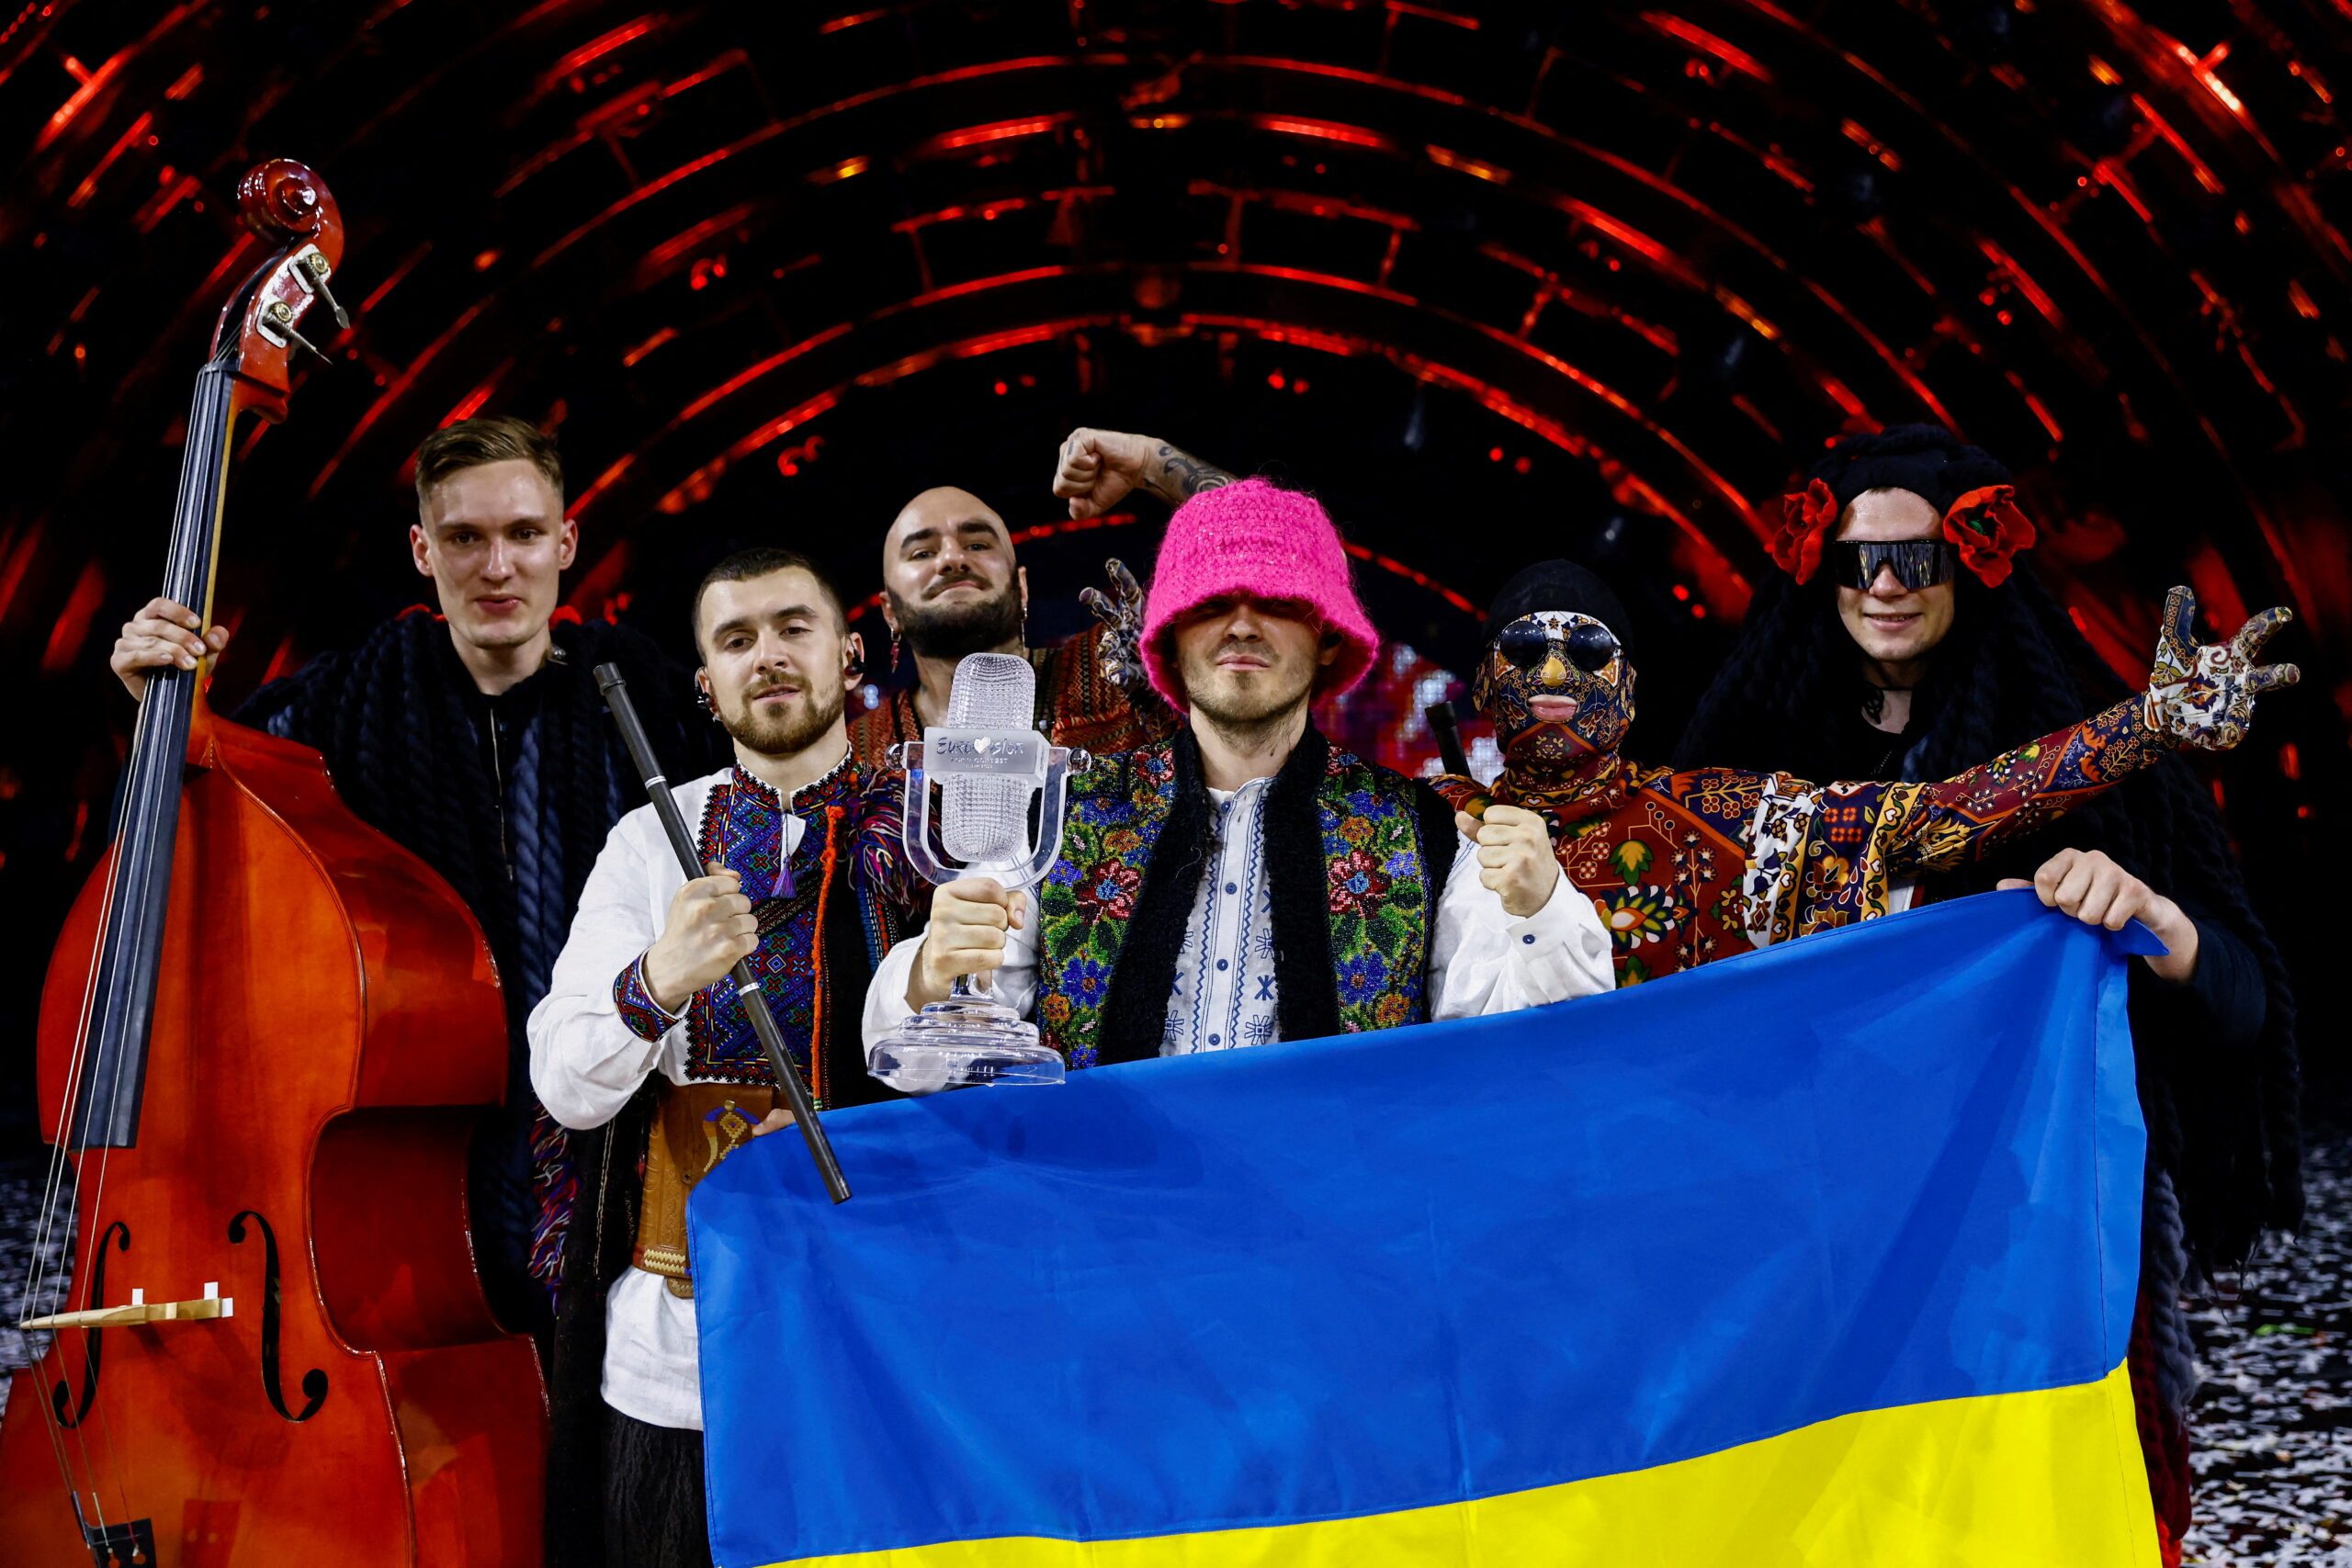 UK set to step in to host next Eurovision due to war in Ukraine